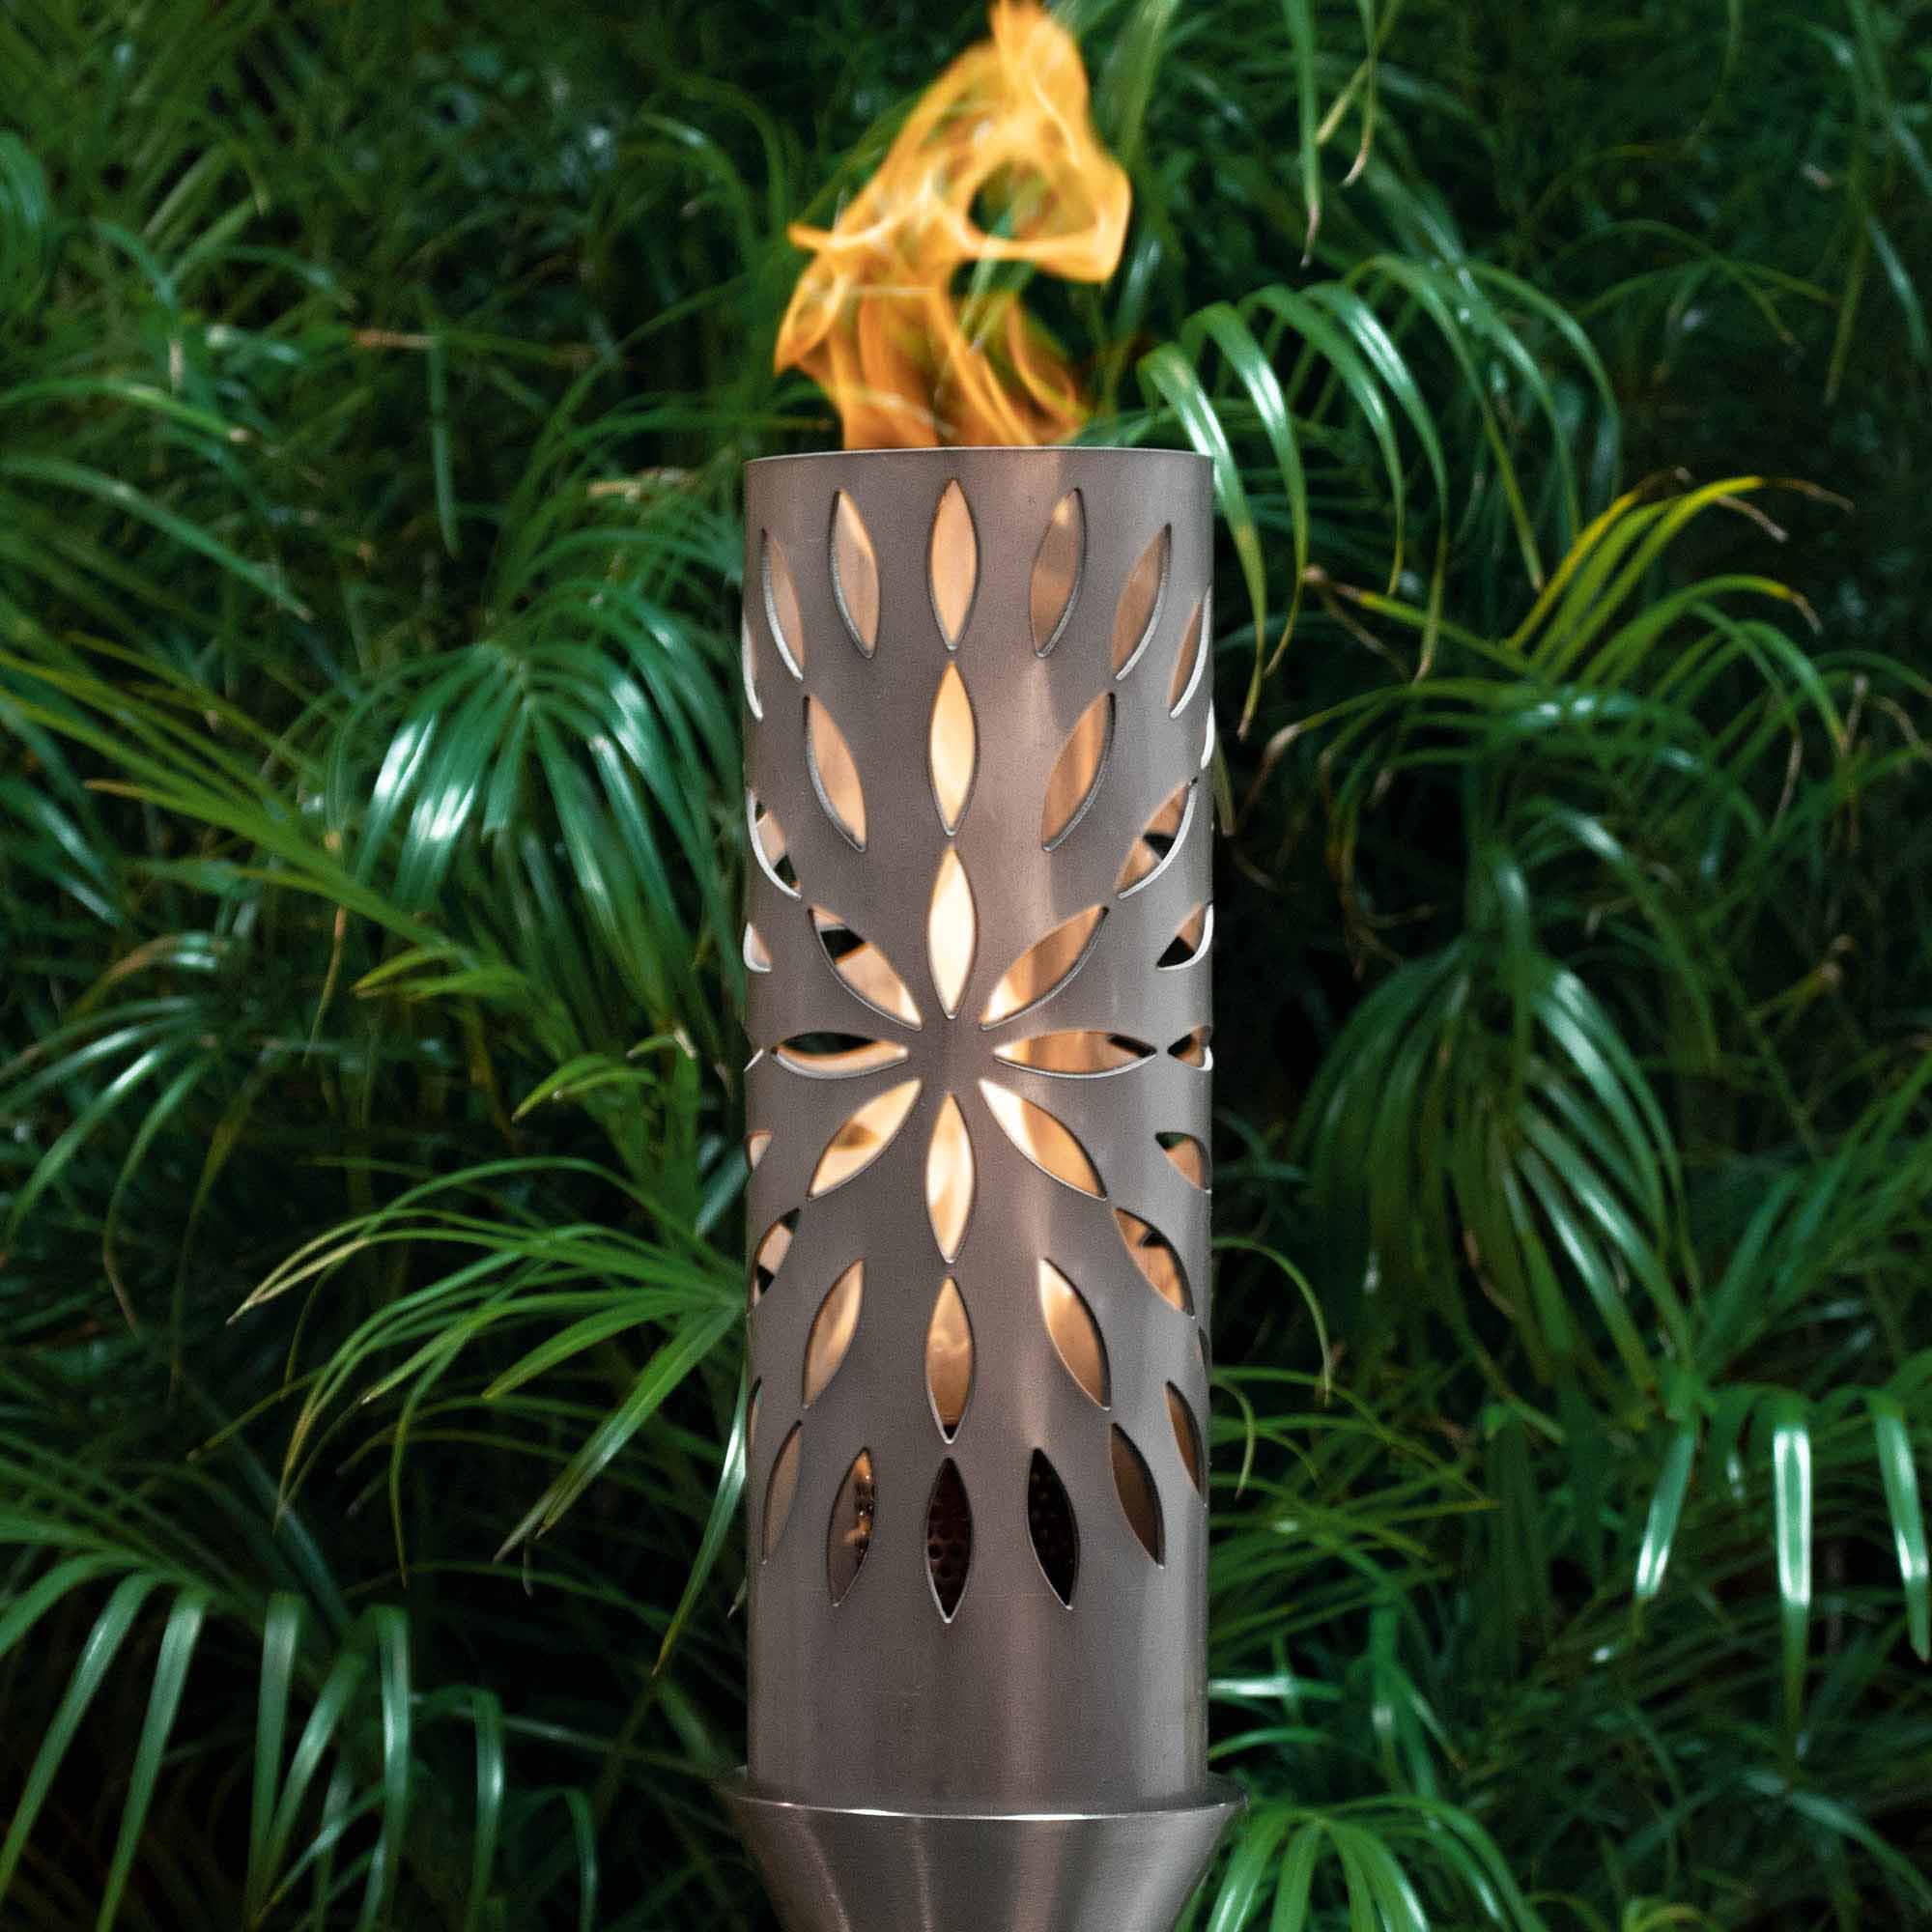 The Outdoor Plus Sunshine Fire Torch